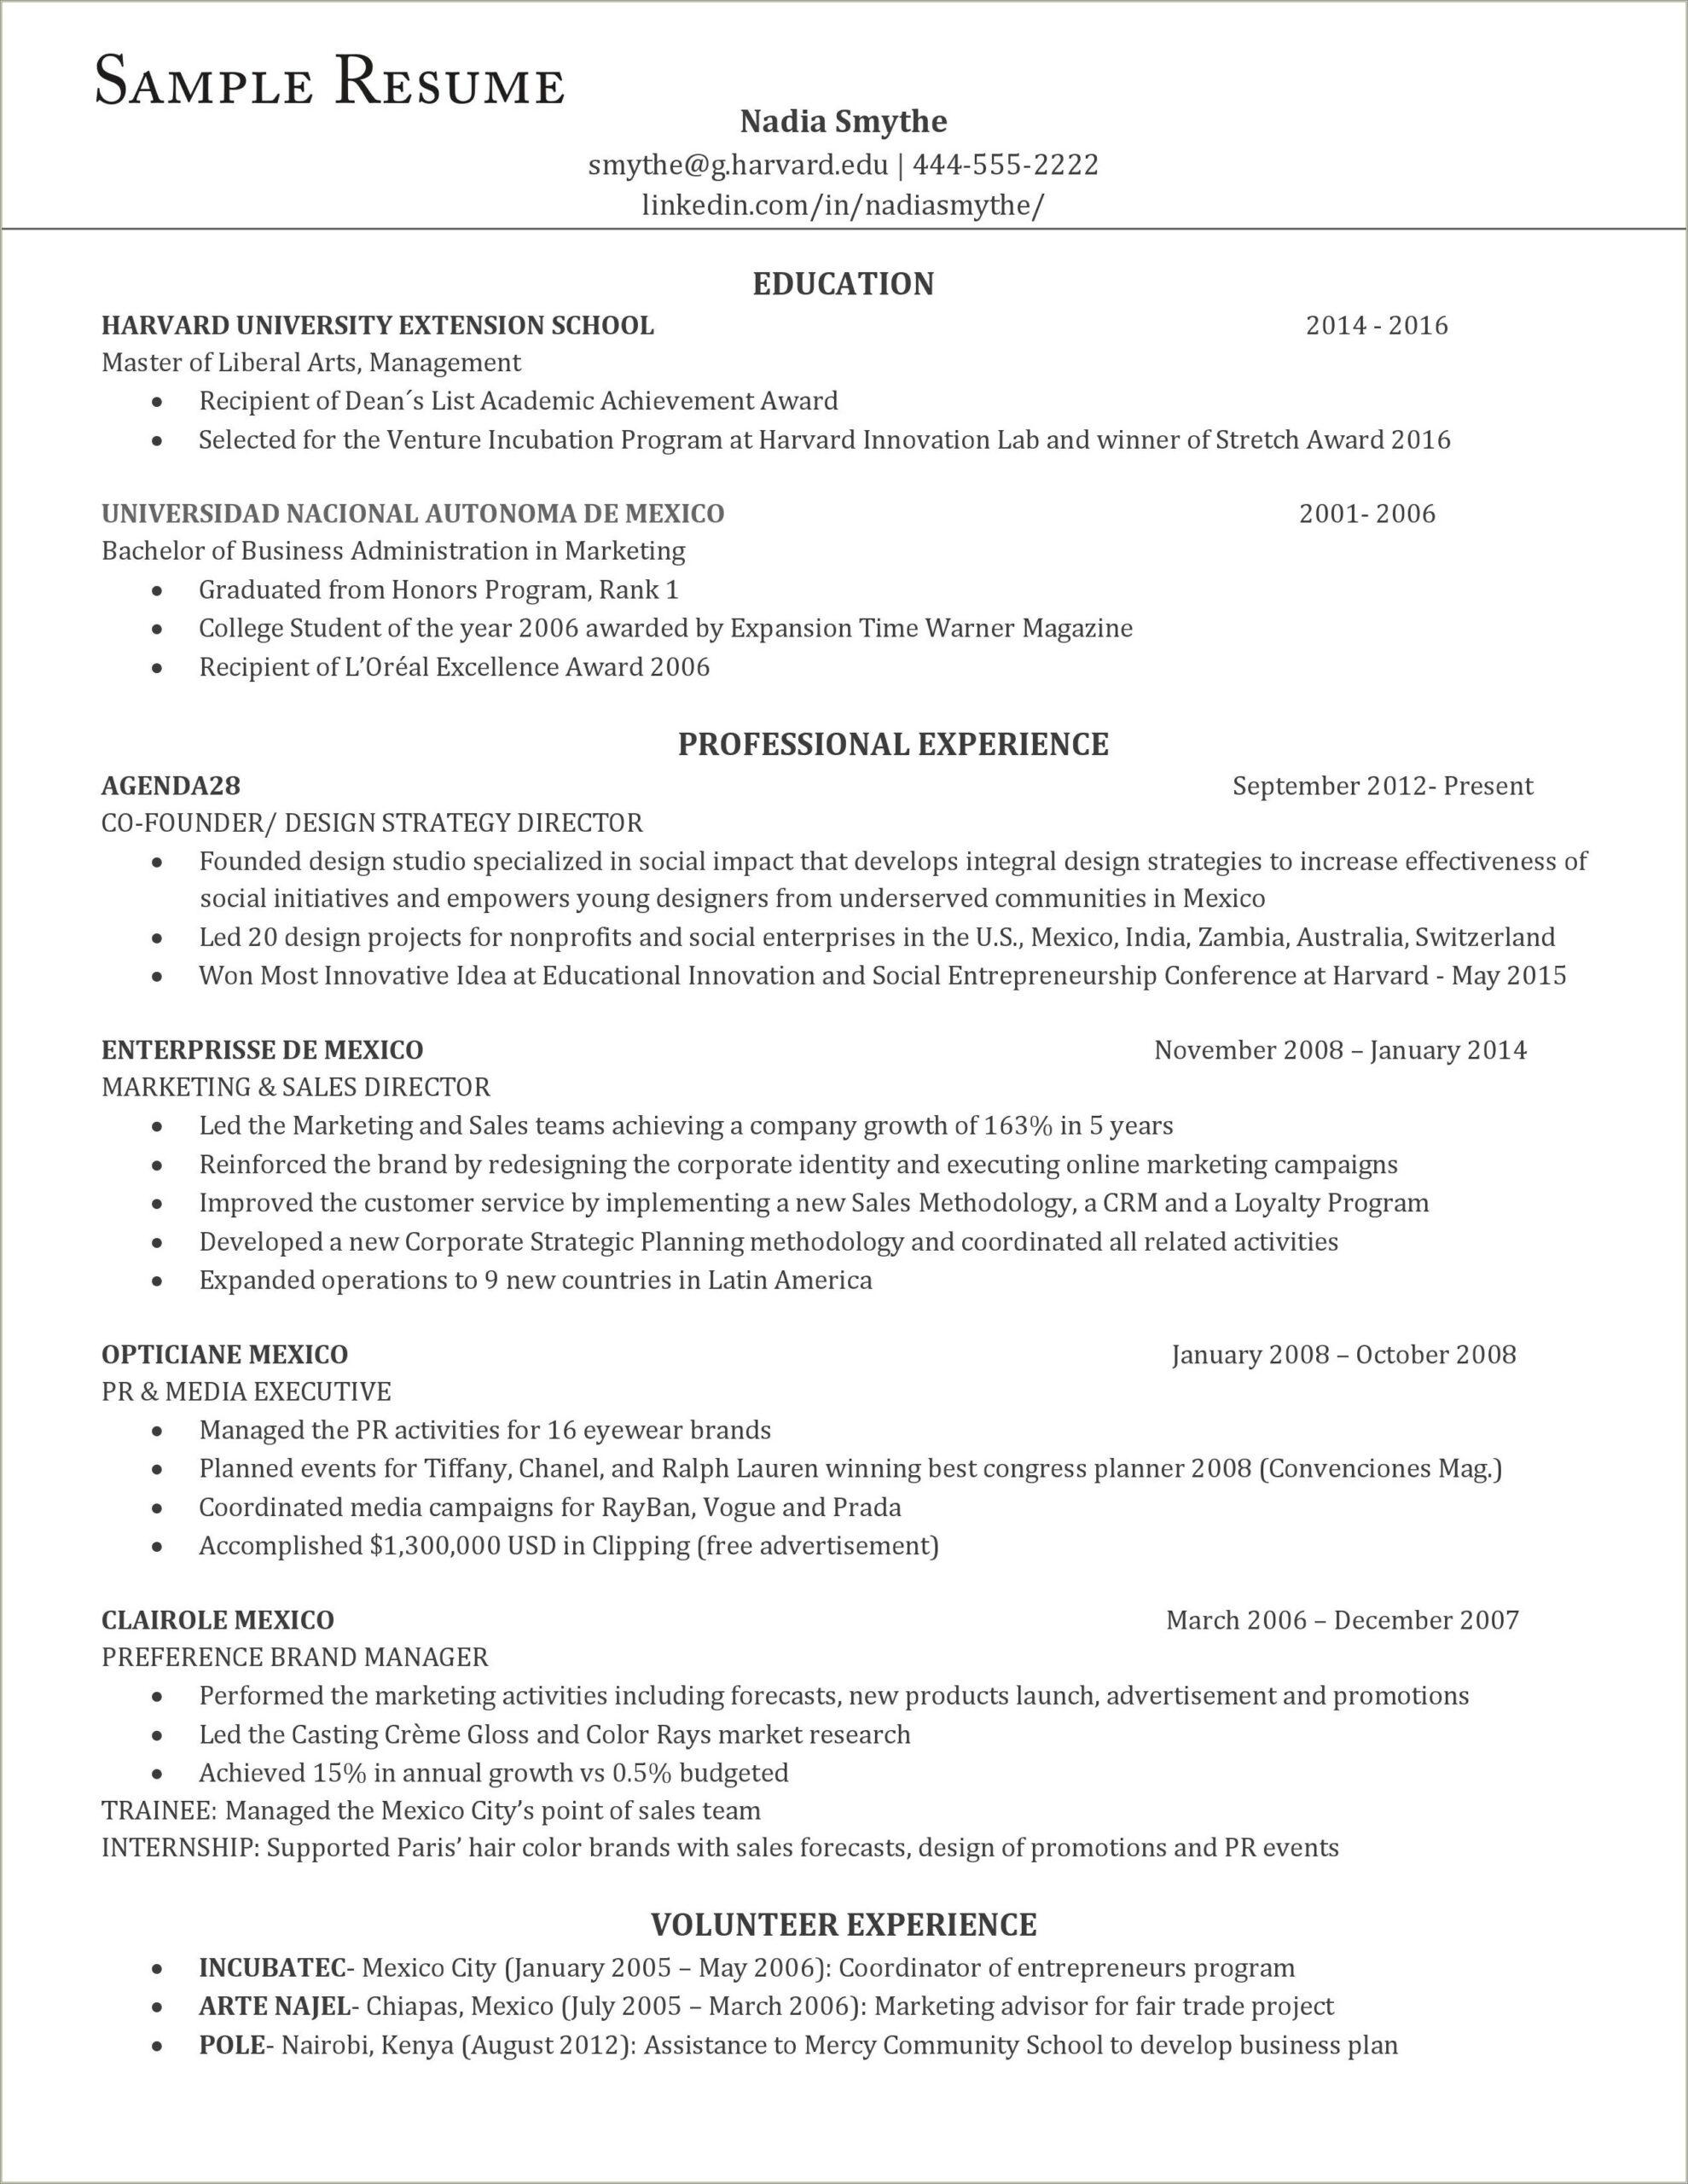 I Want To Make A Good Resume